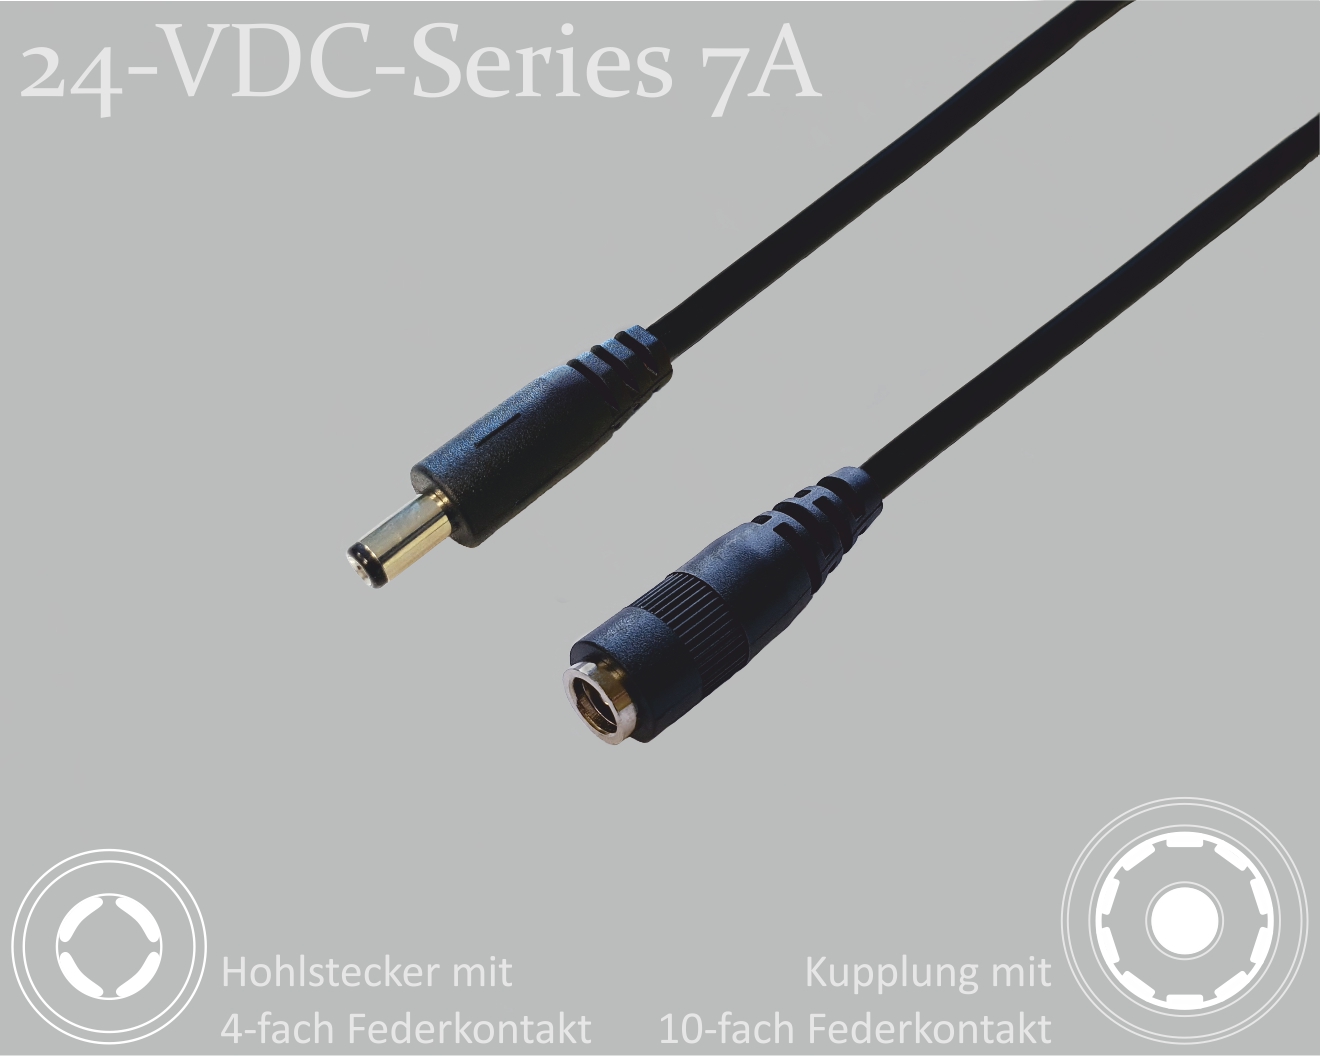 24-VDC-Series 7A, DC extension cable, DC plug with 4-spring contact 2.1x5.5x9.5mm to DC coupling with 10-spring contact 2.1x5.5mm, round cable 2x0.50mm², black, 4m